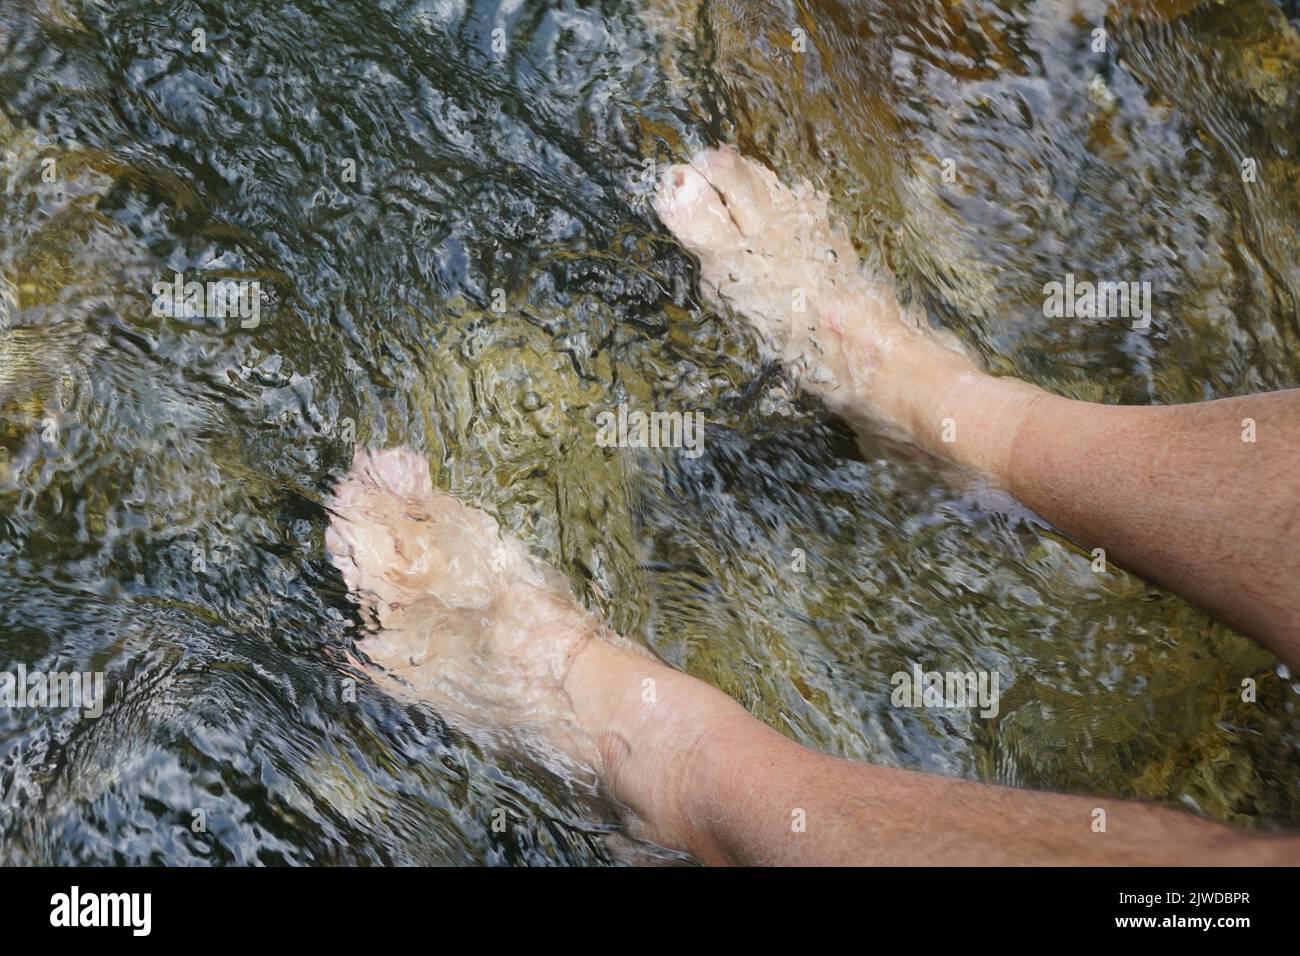 Dipping toes in the beautiful blue water of a natural spring near Blue Spring Heritage Center, Eureka Springs, Arkansas, U.S.A Stock Photo